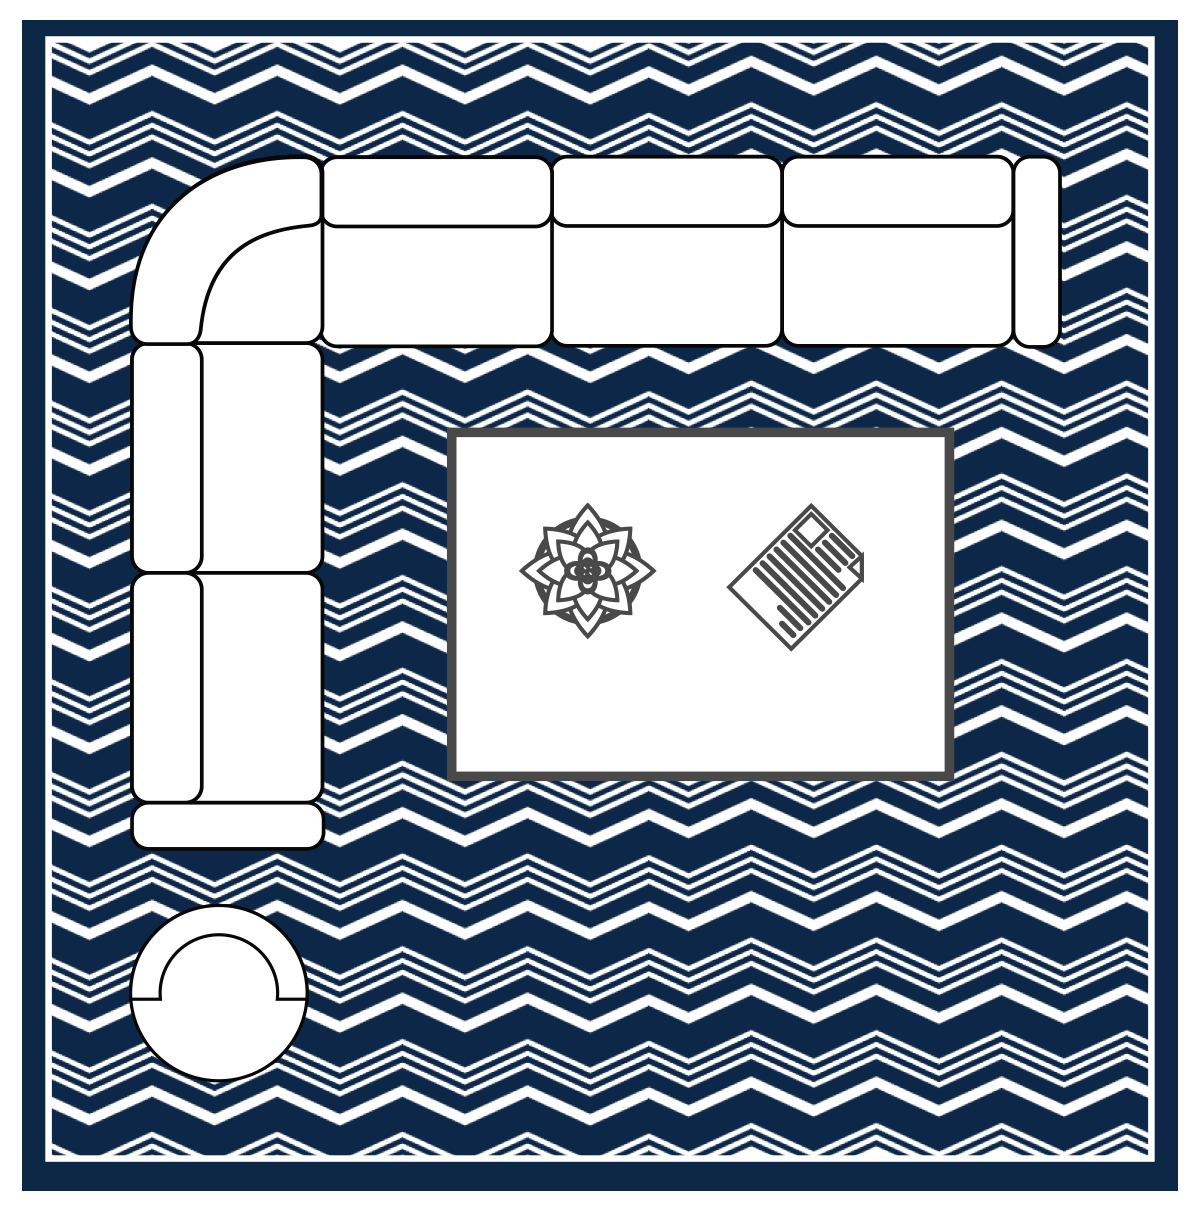 diagram of an area rug layout with all furniture on top of the rug